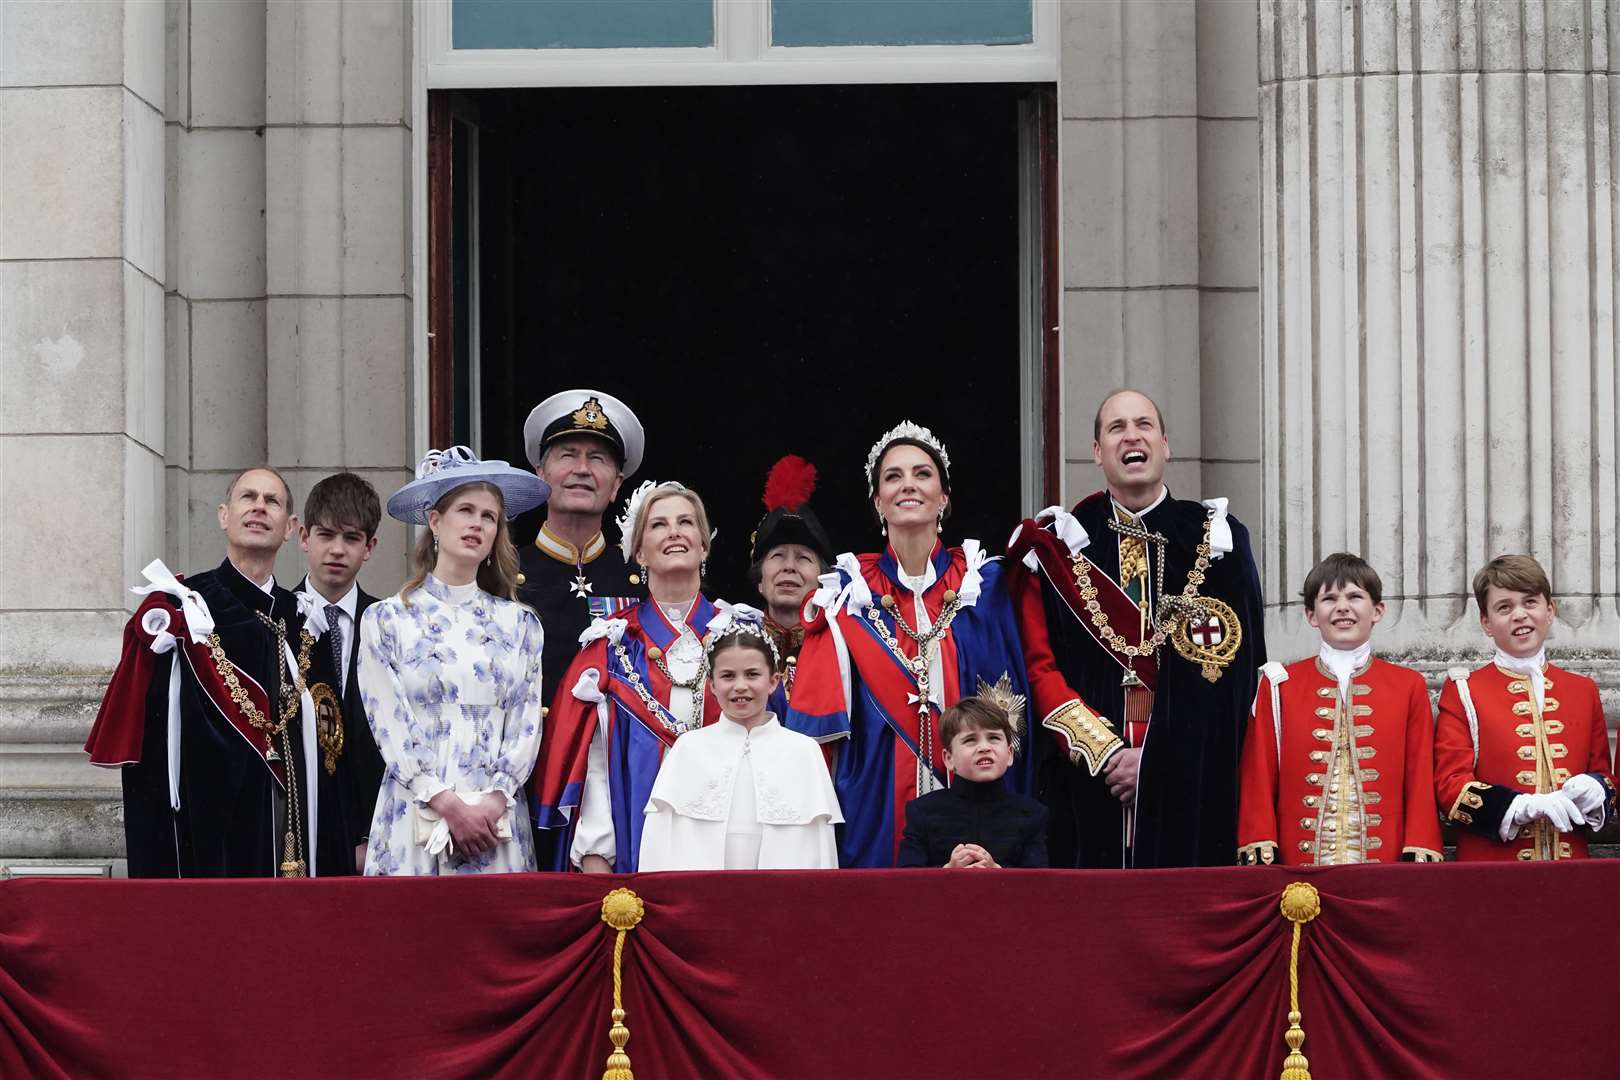 (Left to right) The Duke of Edinburgh, the Earl of Wessex, Lady Louise Windsor, Vice Admiral Timothy Laurence, the Duchess of Edinburgh, Princess Charlotte, the Princess Royal, the Princess of Wales, Prince Louis, the Prince of Wales and the Pages of Honour including Prince George (far right) on the balcony of Buckingham Palace after the coronation (Jordan Pettitt/PA)